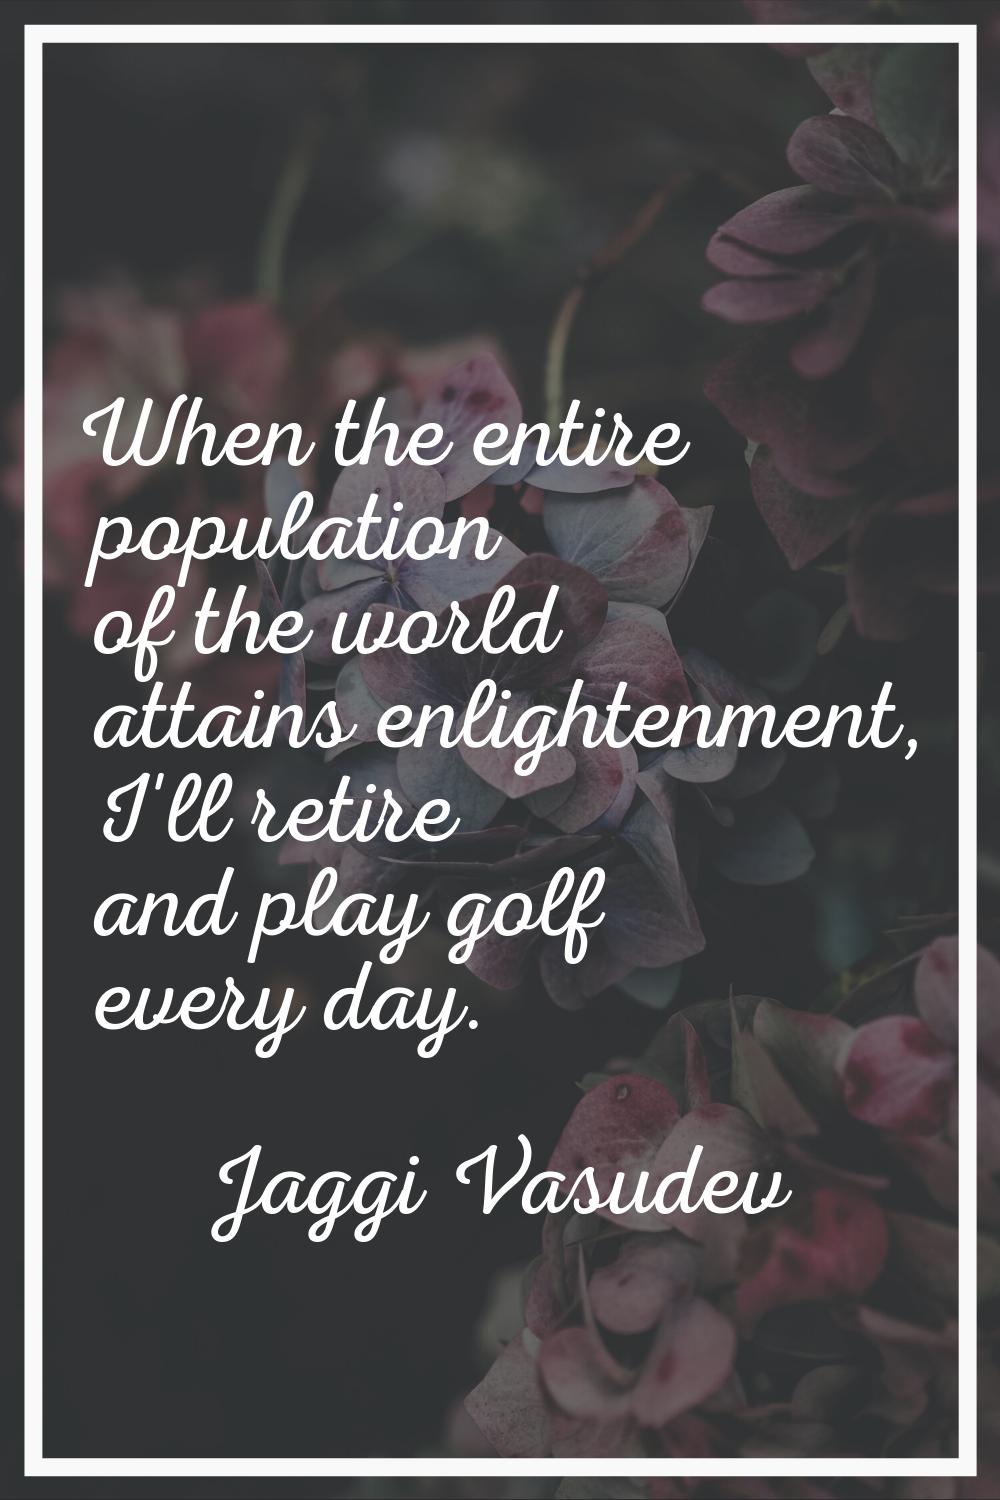 When the entire population of the world attains enlightenment, I'll retire and play golf every day.